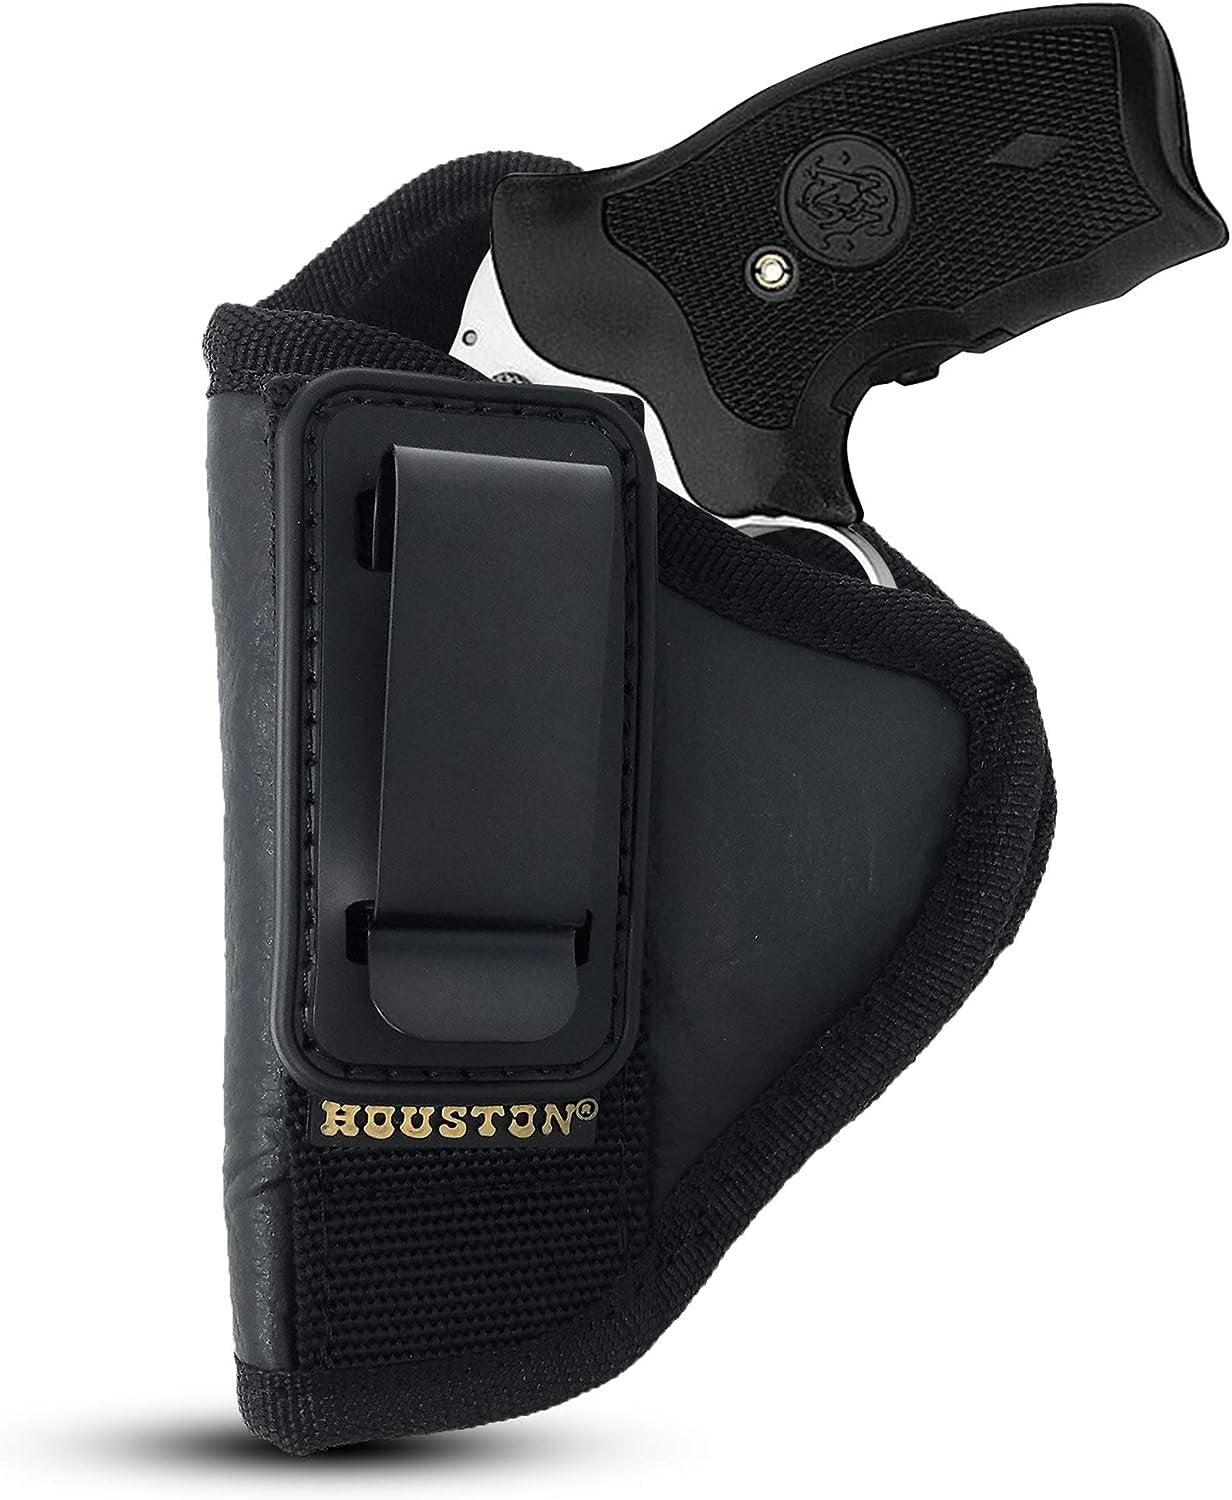 IWB TUCKABLE Revolver Holster by Houston - ECO Leather Concealed Carry Soft Material | Suede Interior for Protection | Fits Any 38 J Frames, S&W, Charter Arms, Rossi 38, Taurus,BG,LCR (Left Hand)